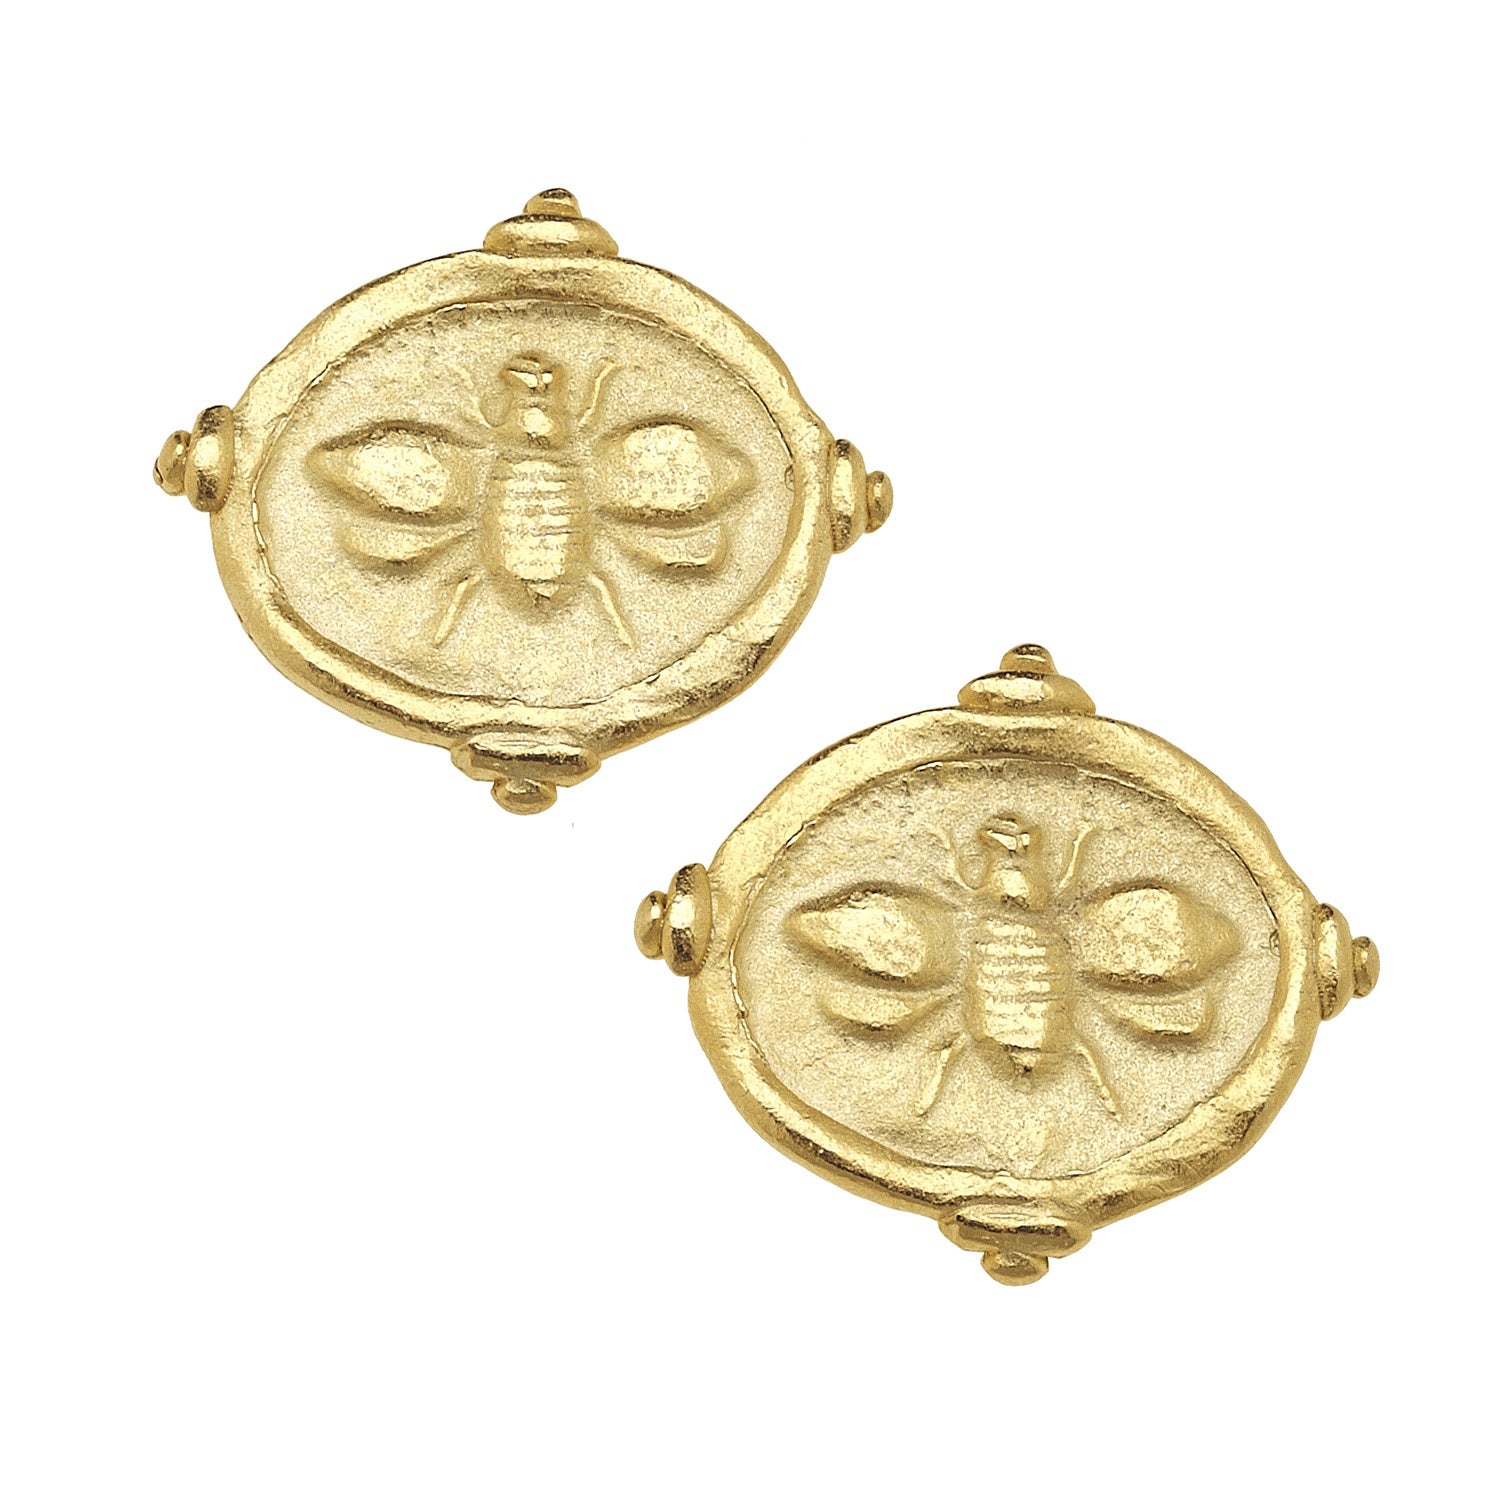 Susan Shaw Jewelry Bee Coin Earrings in Gold